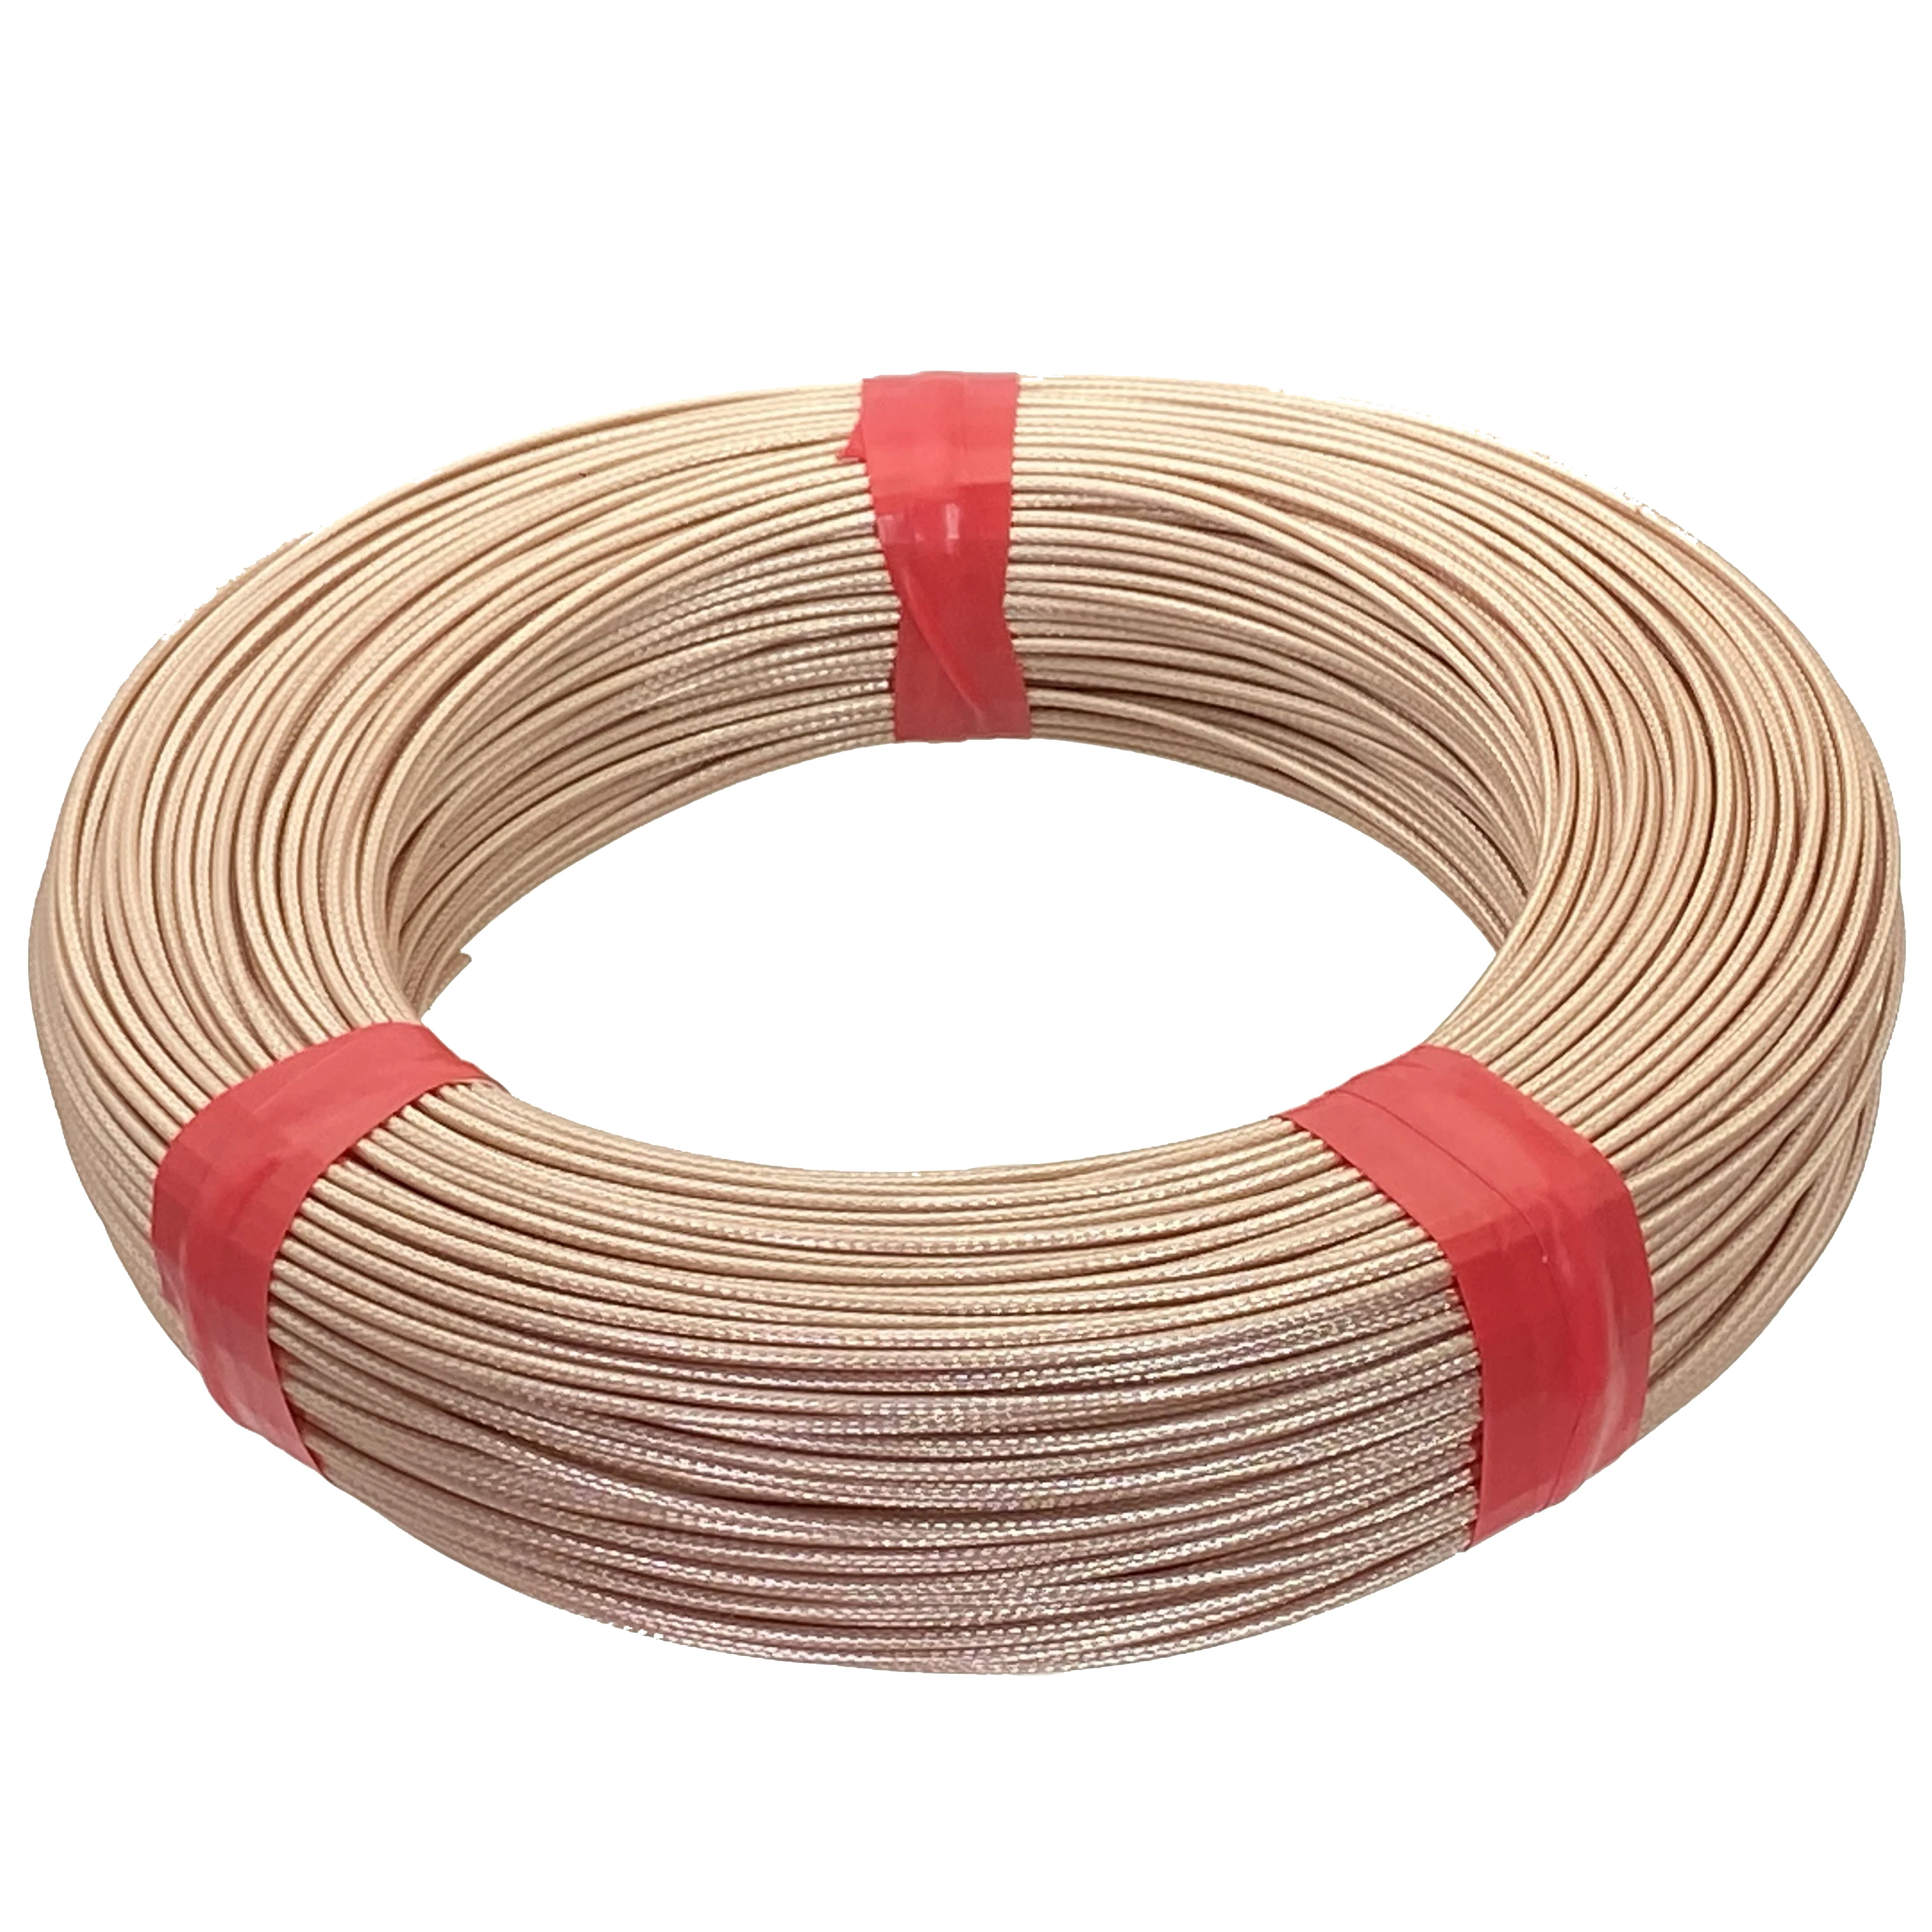 RG316 cable RF Coax Coaxial cable wire lot 50ohm M17/113 Shielded Pigtail 1M/2M/3M/5M/10M/20M